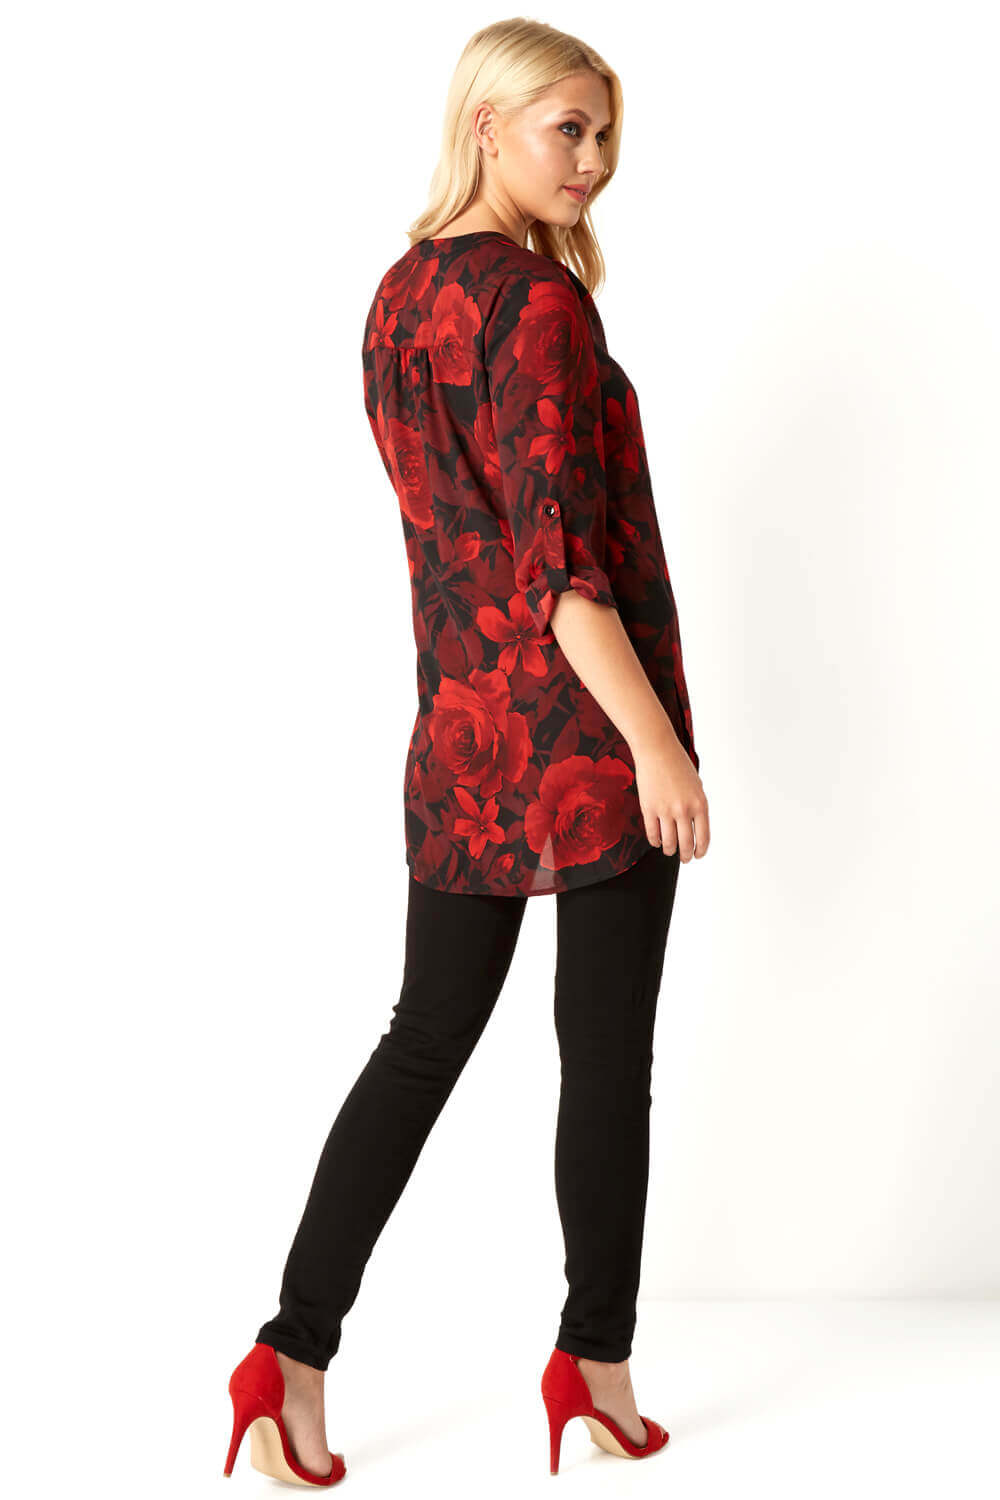 Red 3/4 Sleeve Rose Print Floral Button Up Blouse, Image 3 of 3